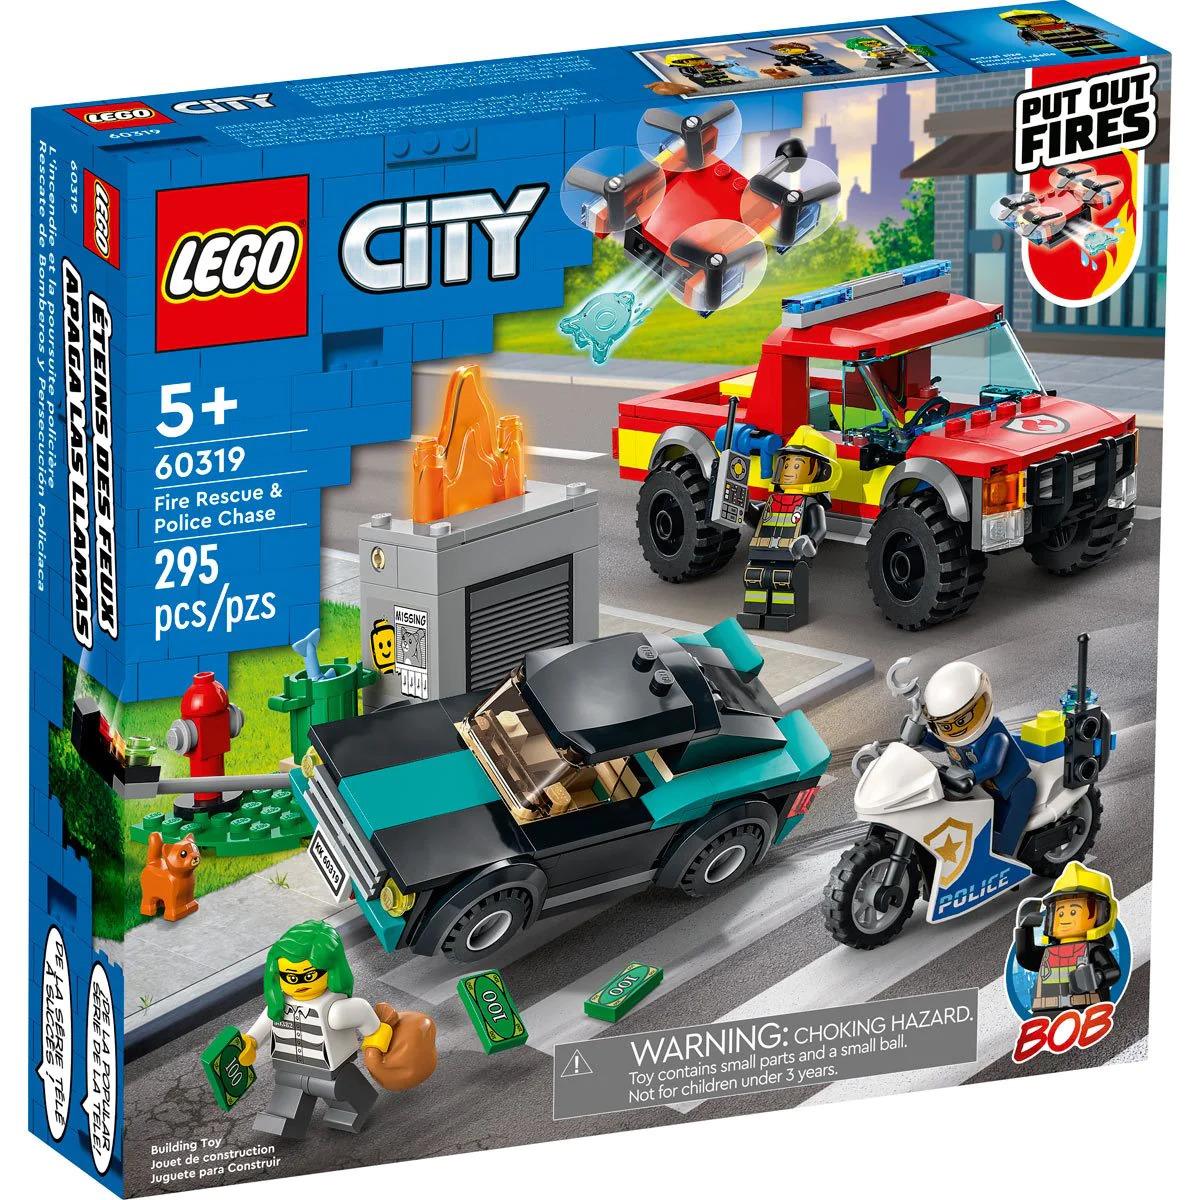 Lego 60319 City Fire Rescue Police Chase